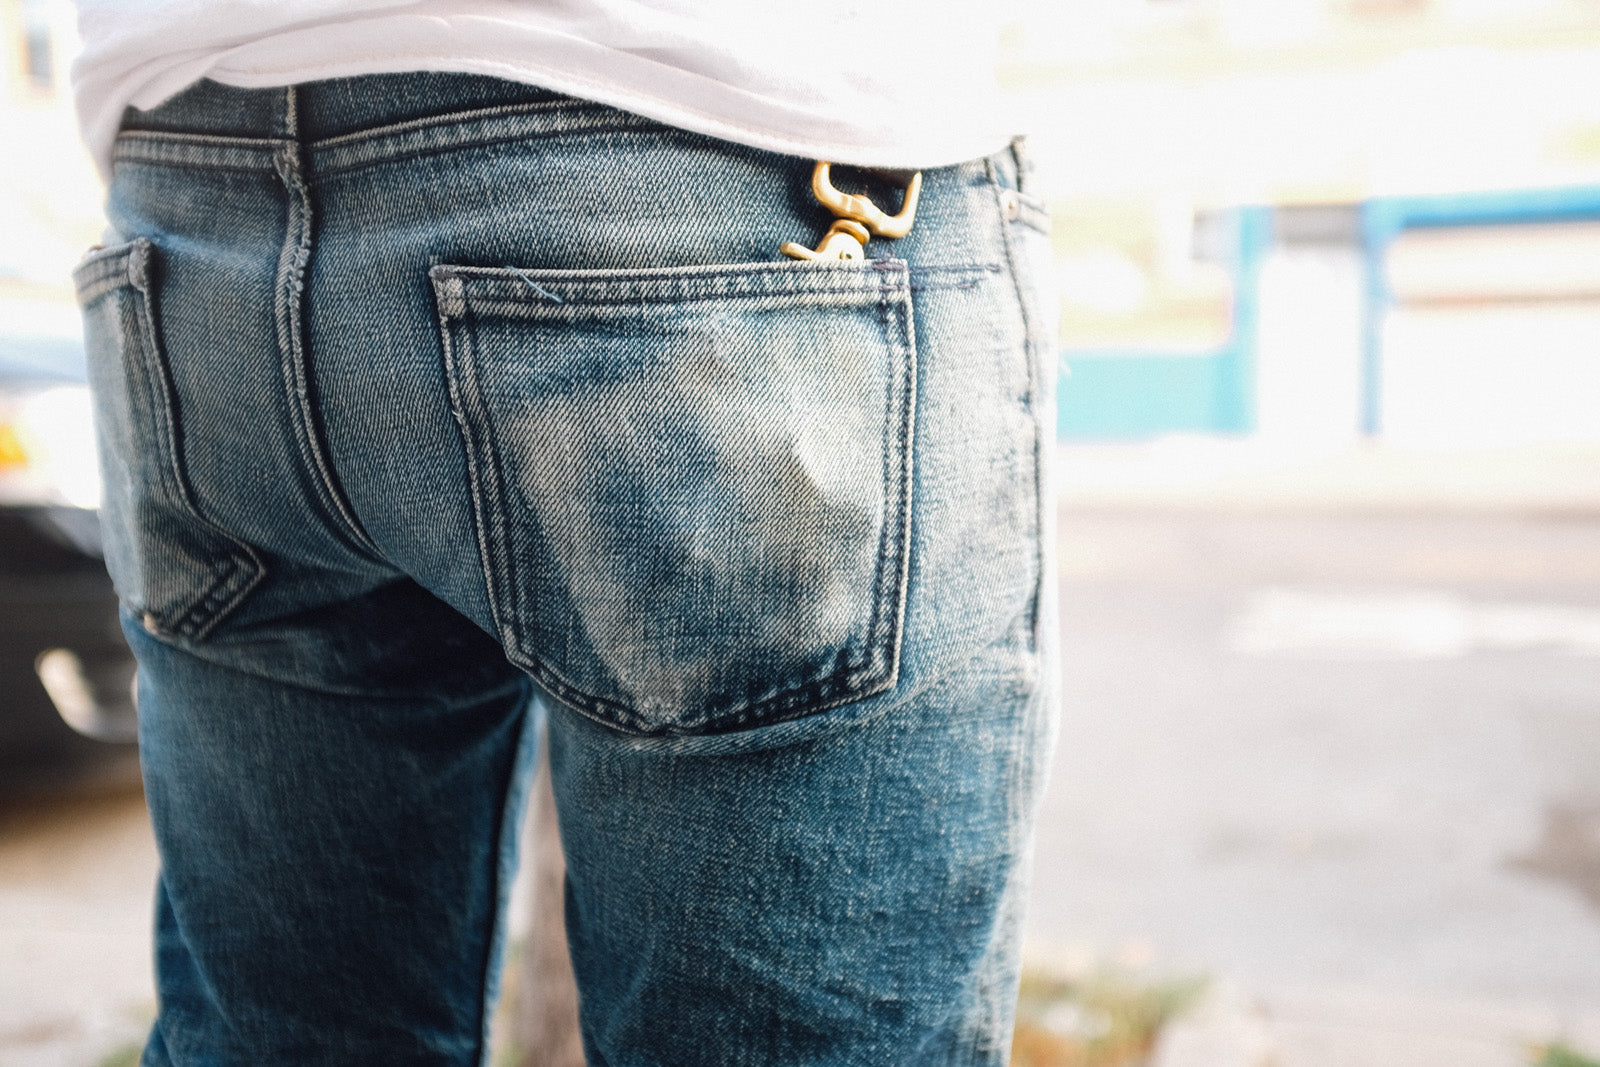 A photo of the backside of a faded pair of blue jeans.